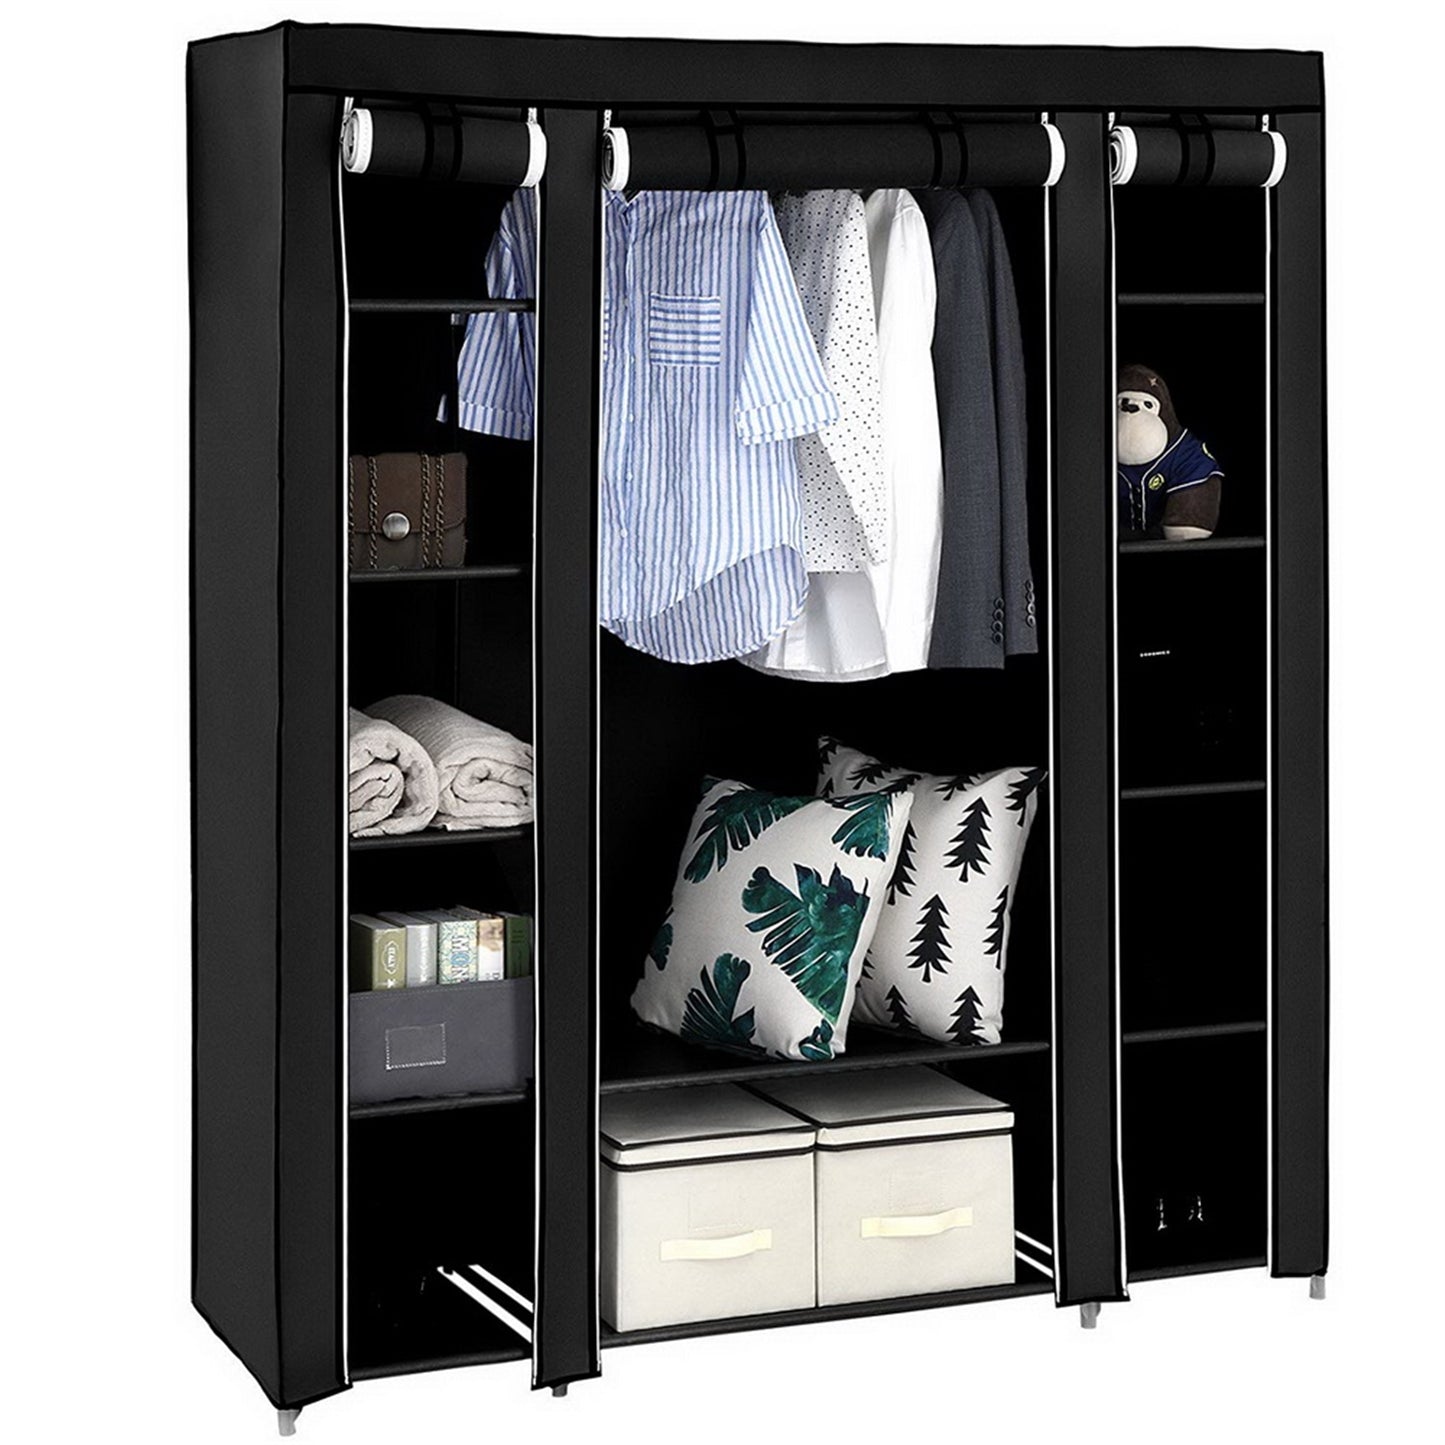 69" Portable Clothes Closet Wardrobe Storage Organizer with Non-Woven Fabric Quick and Easy to Assemble Extra Strong and Durable Black